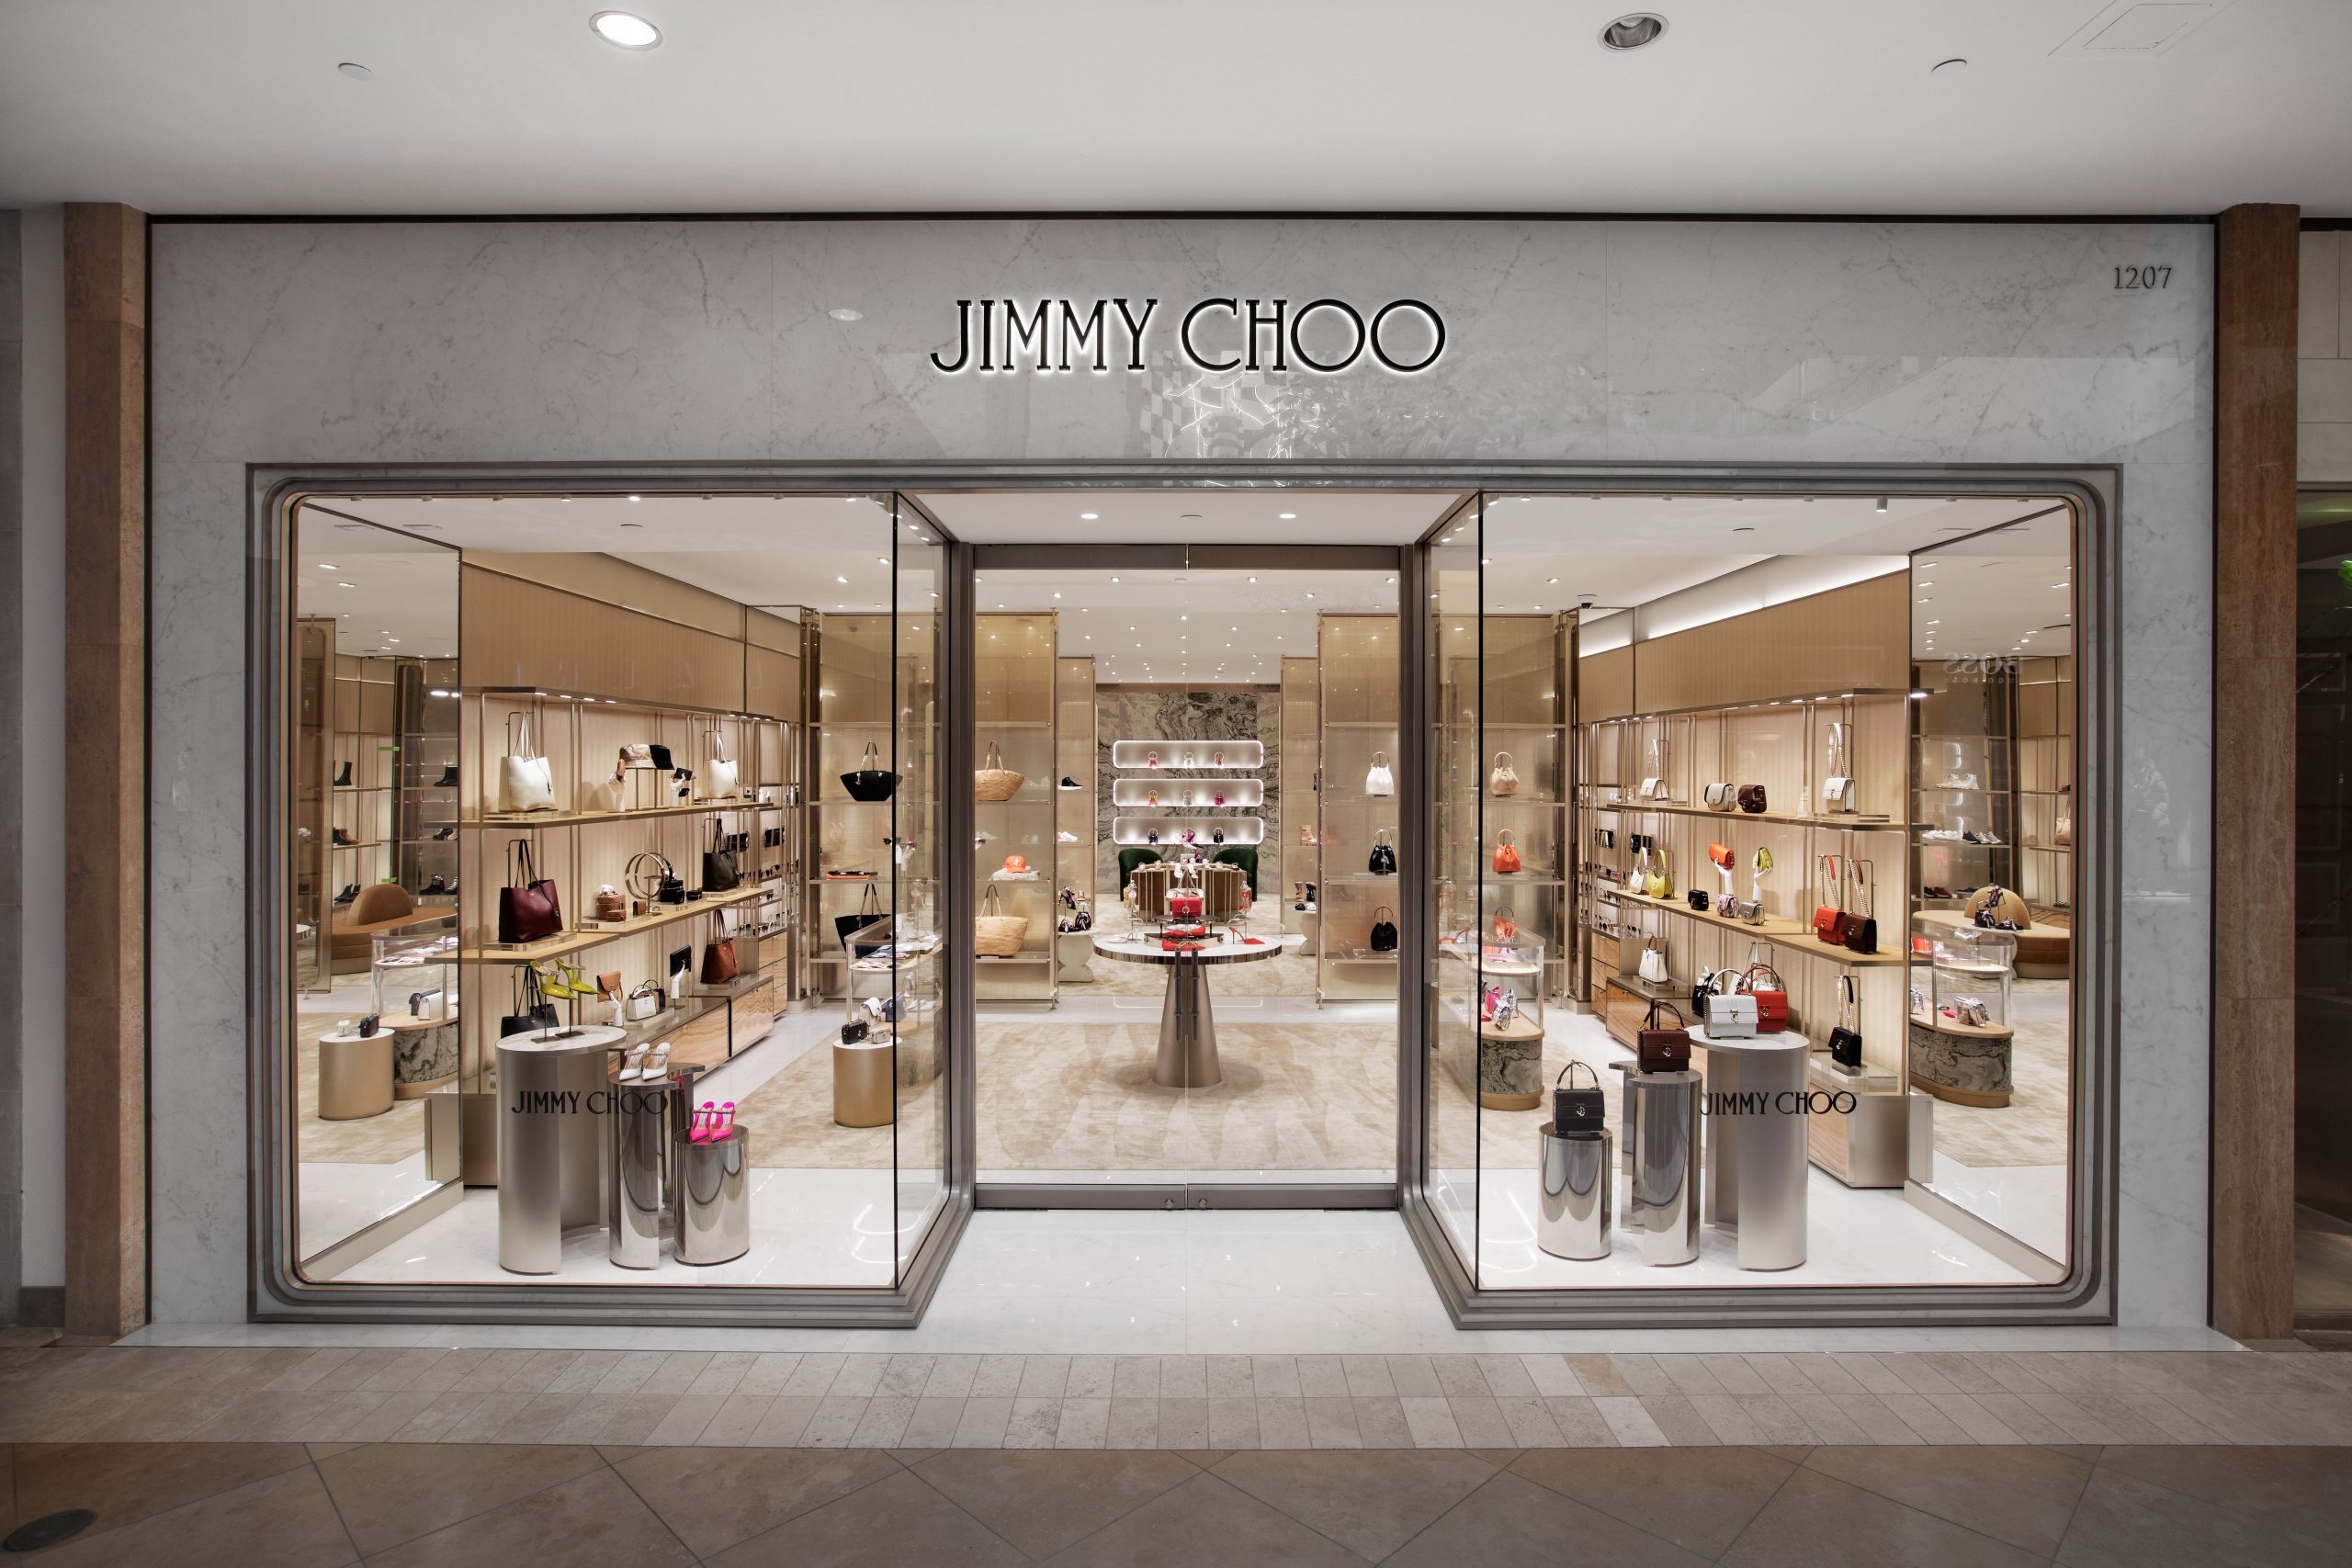 Jimmy Choo opens first Houston outlet store location in Cypress